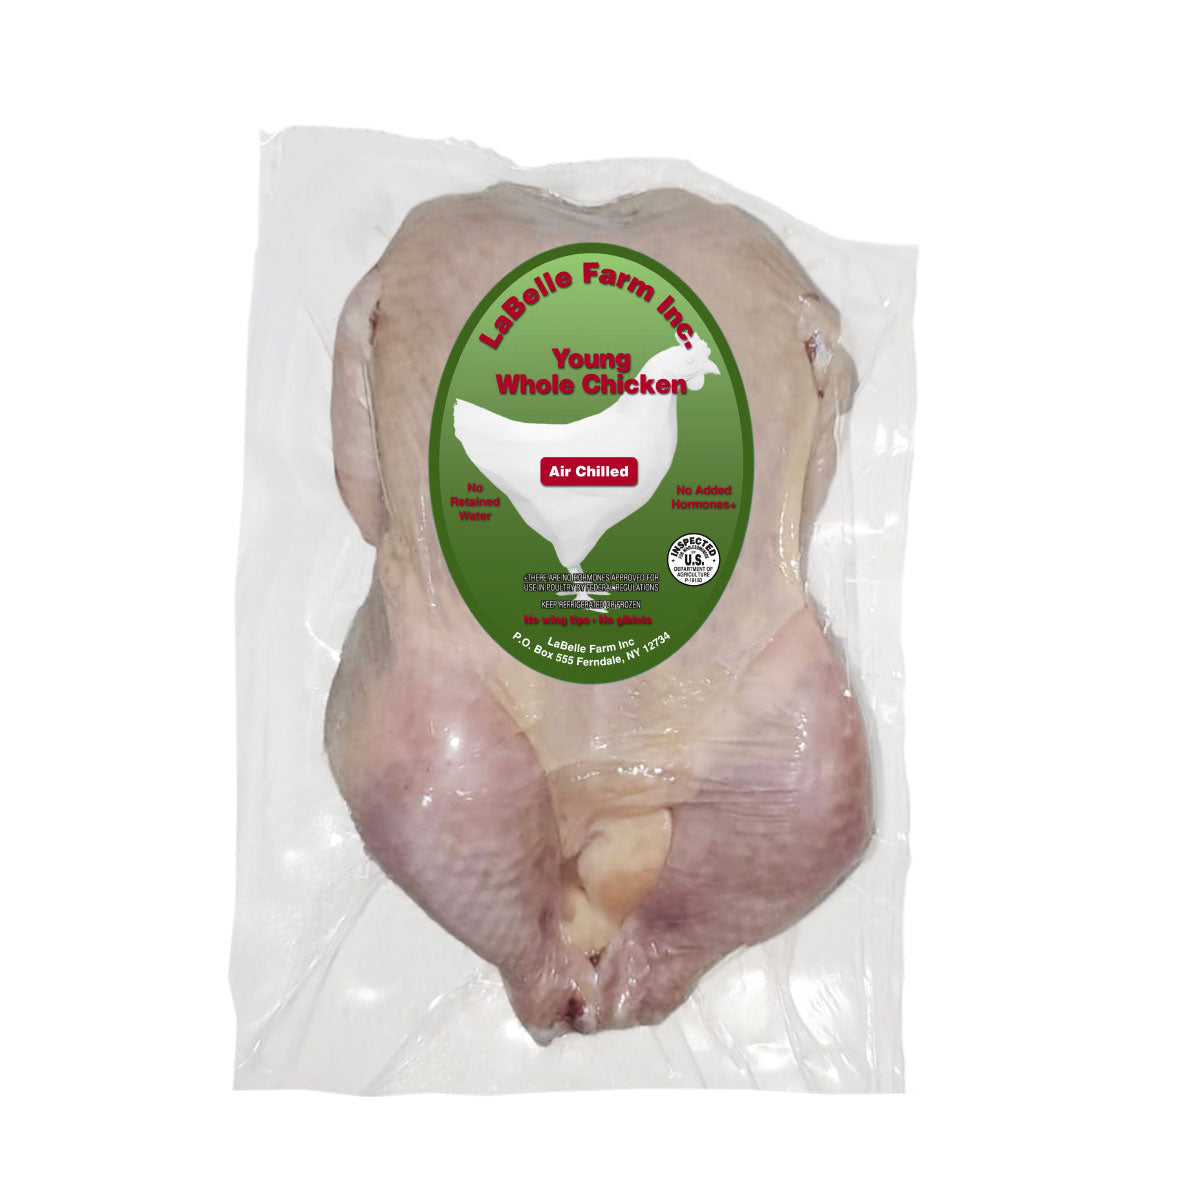 La Belle Farm Air Chilled Whole Chickens Retail Ready